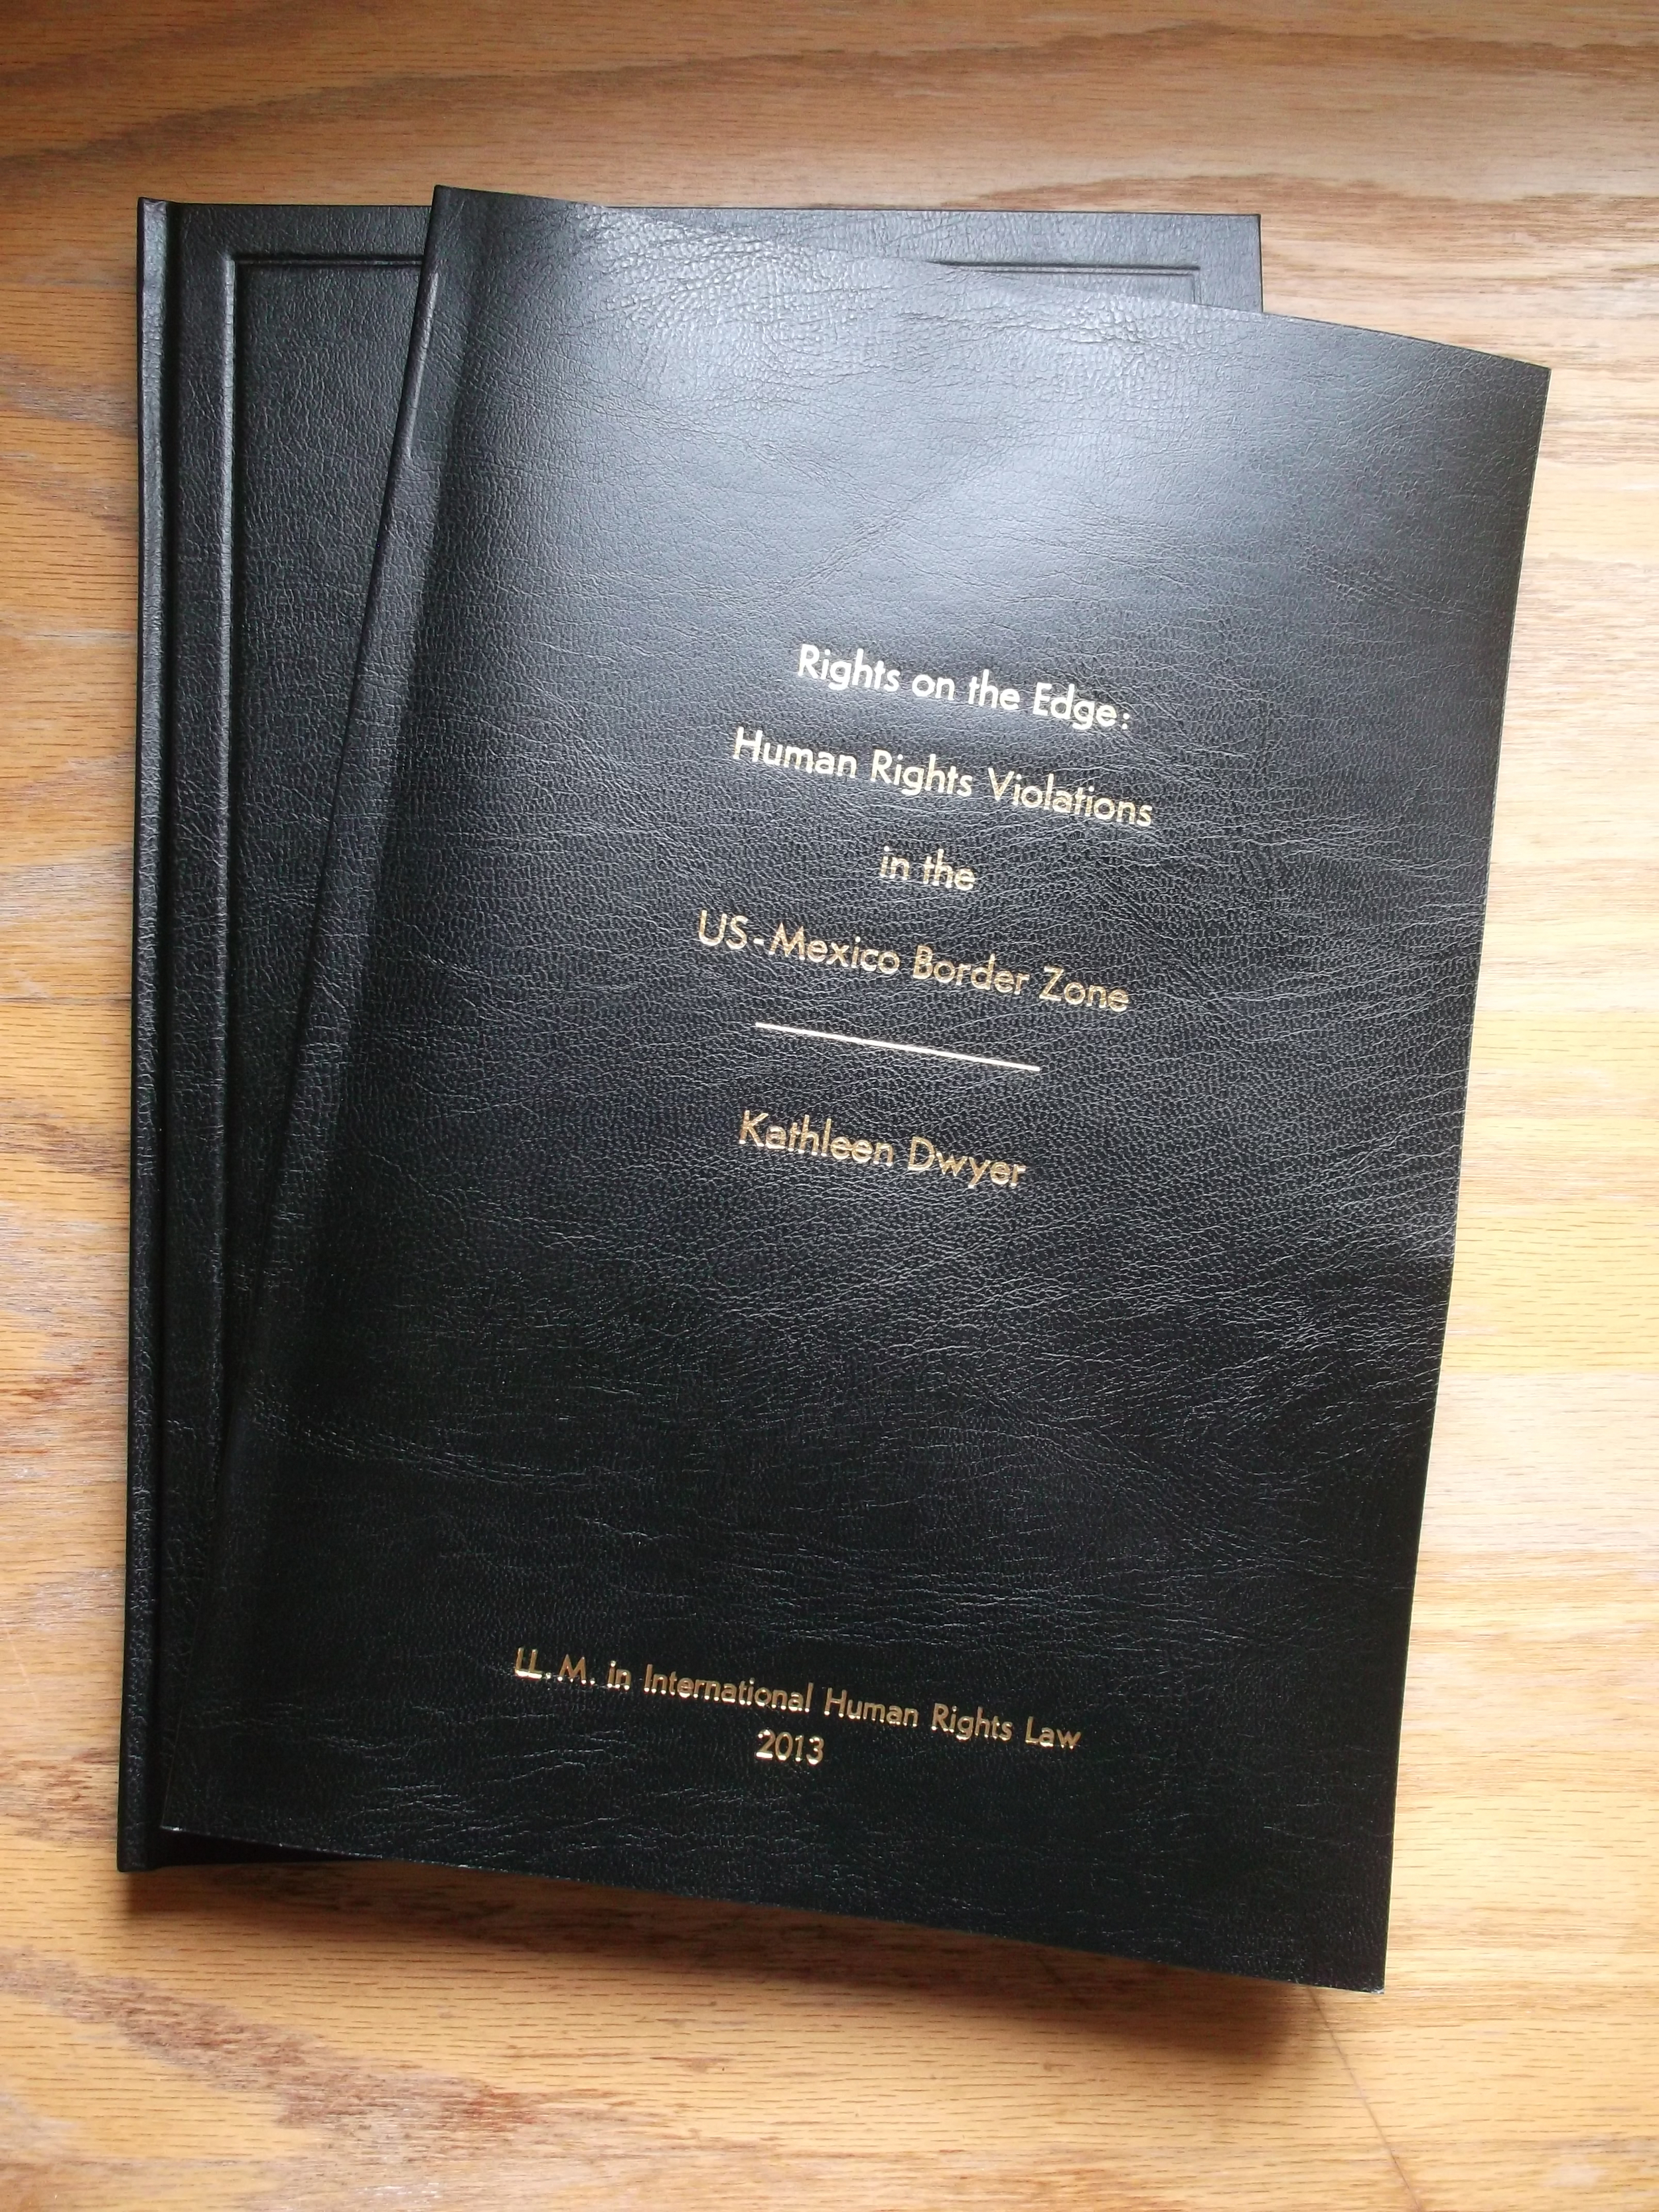 Master thesis in business law